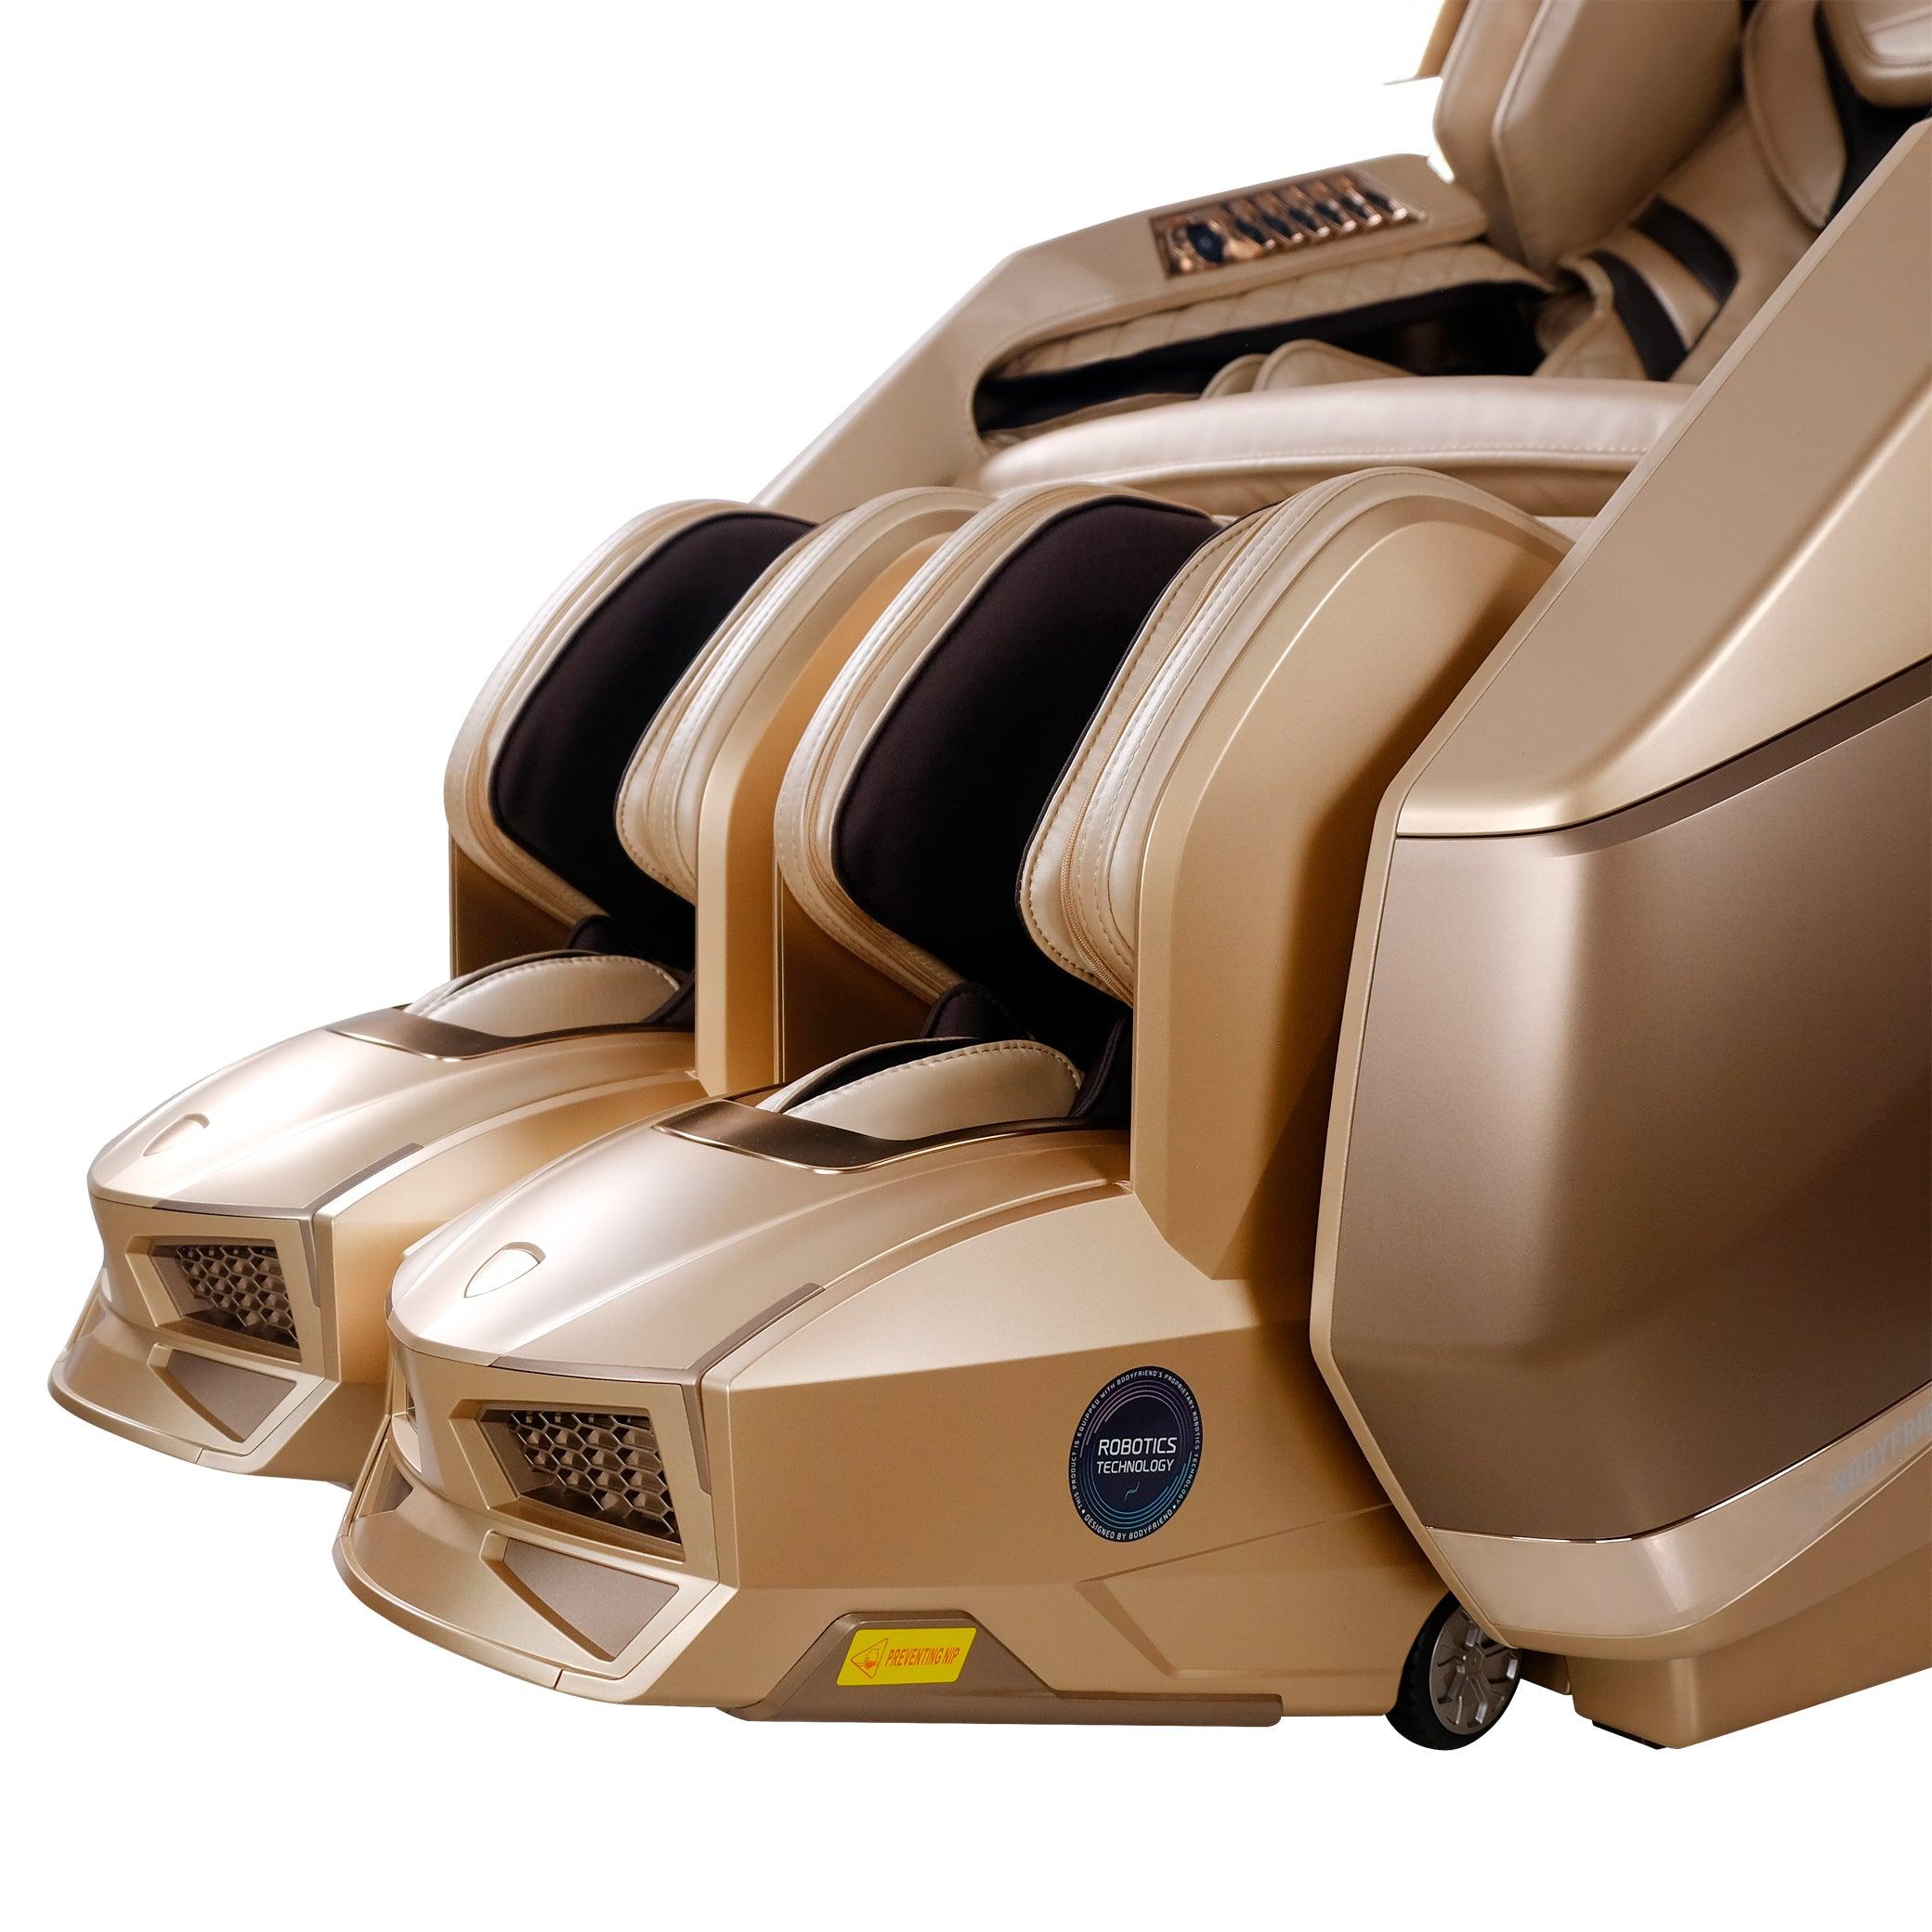 AI Robotic Massage Chair in Sleek Golden with Rovo Walking Technology and full body airbags, available at massage chair shop in Dubai, UAE. best massage chair uae, massage chair Dubai, massage chair uae, massage chair Saudi Arabia, كرسي التدليك, Best mass